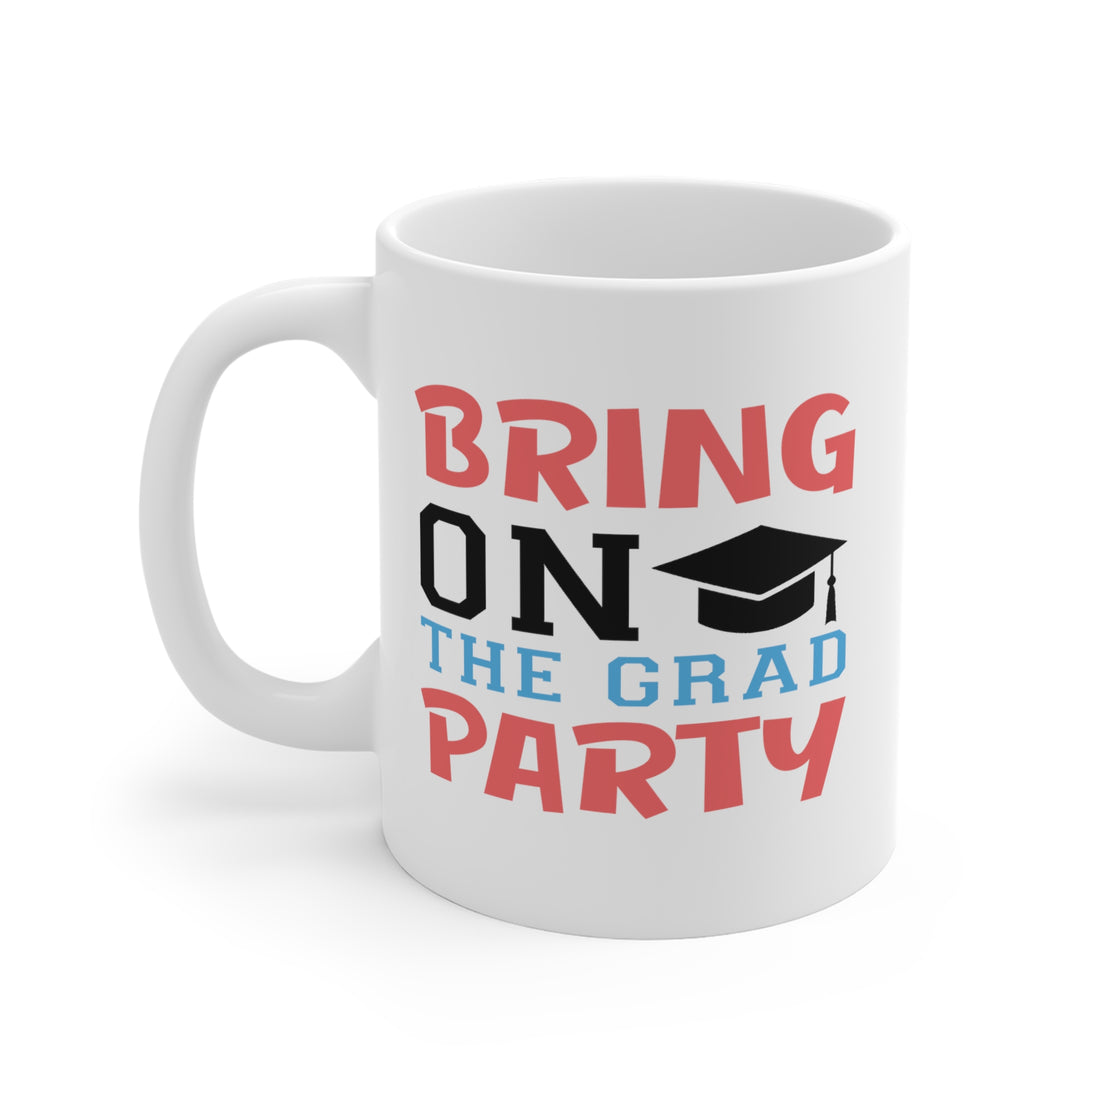 Bring On The Grad Party - White Ceramic Mug 2 sizes Available